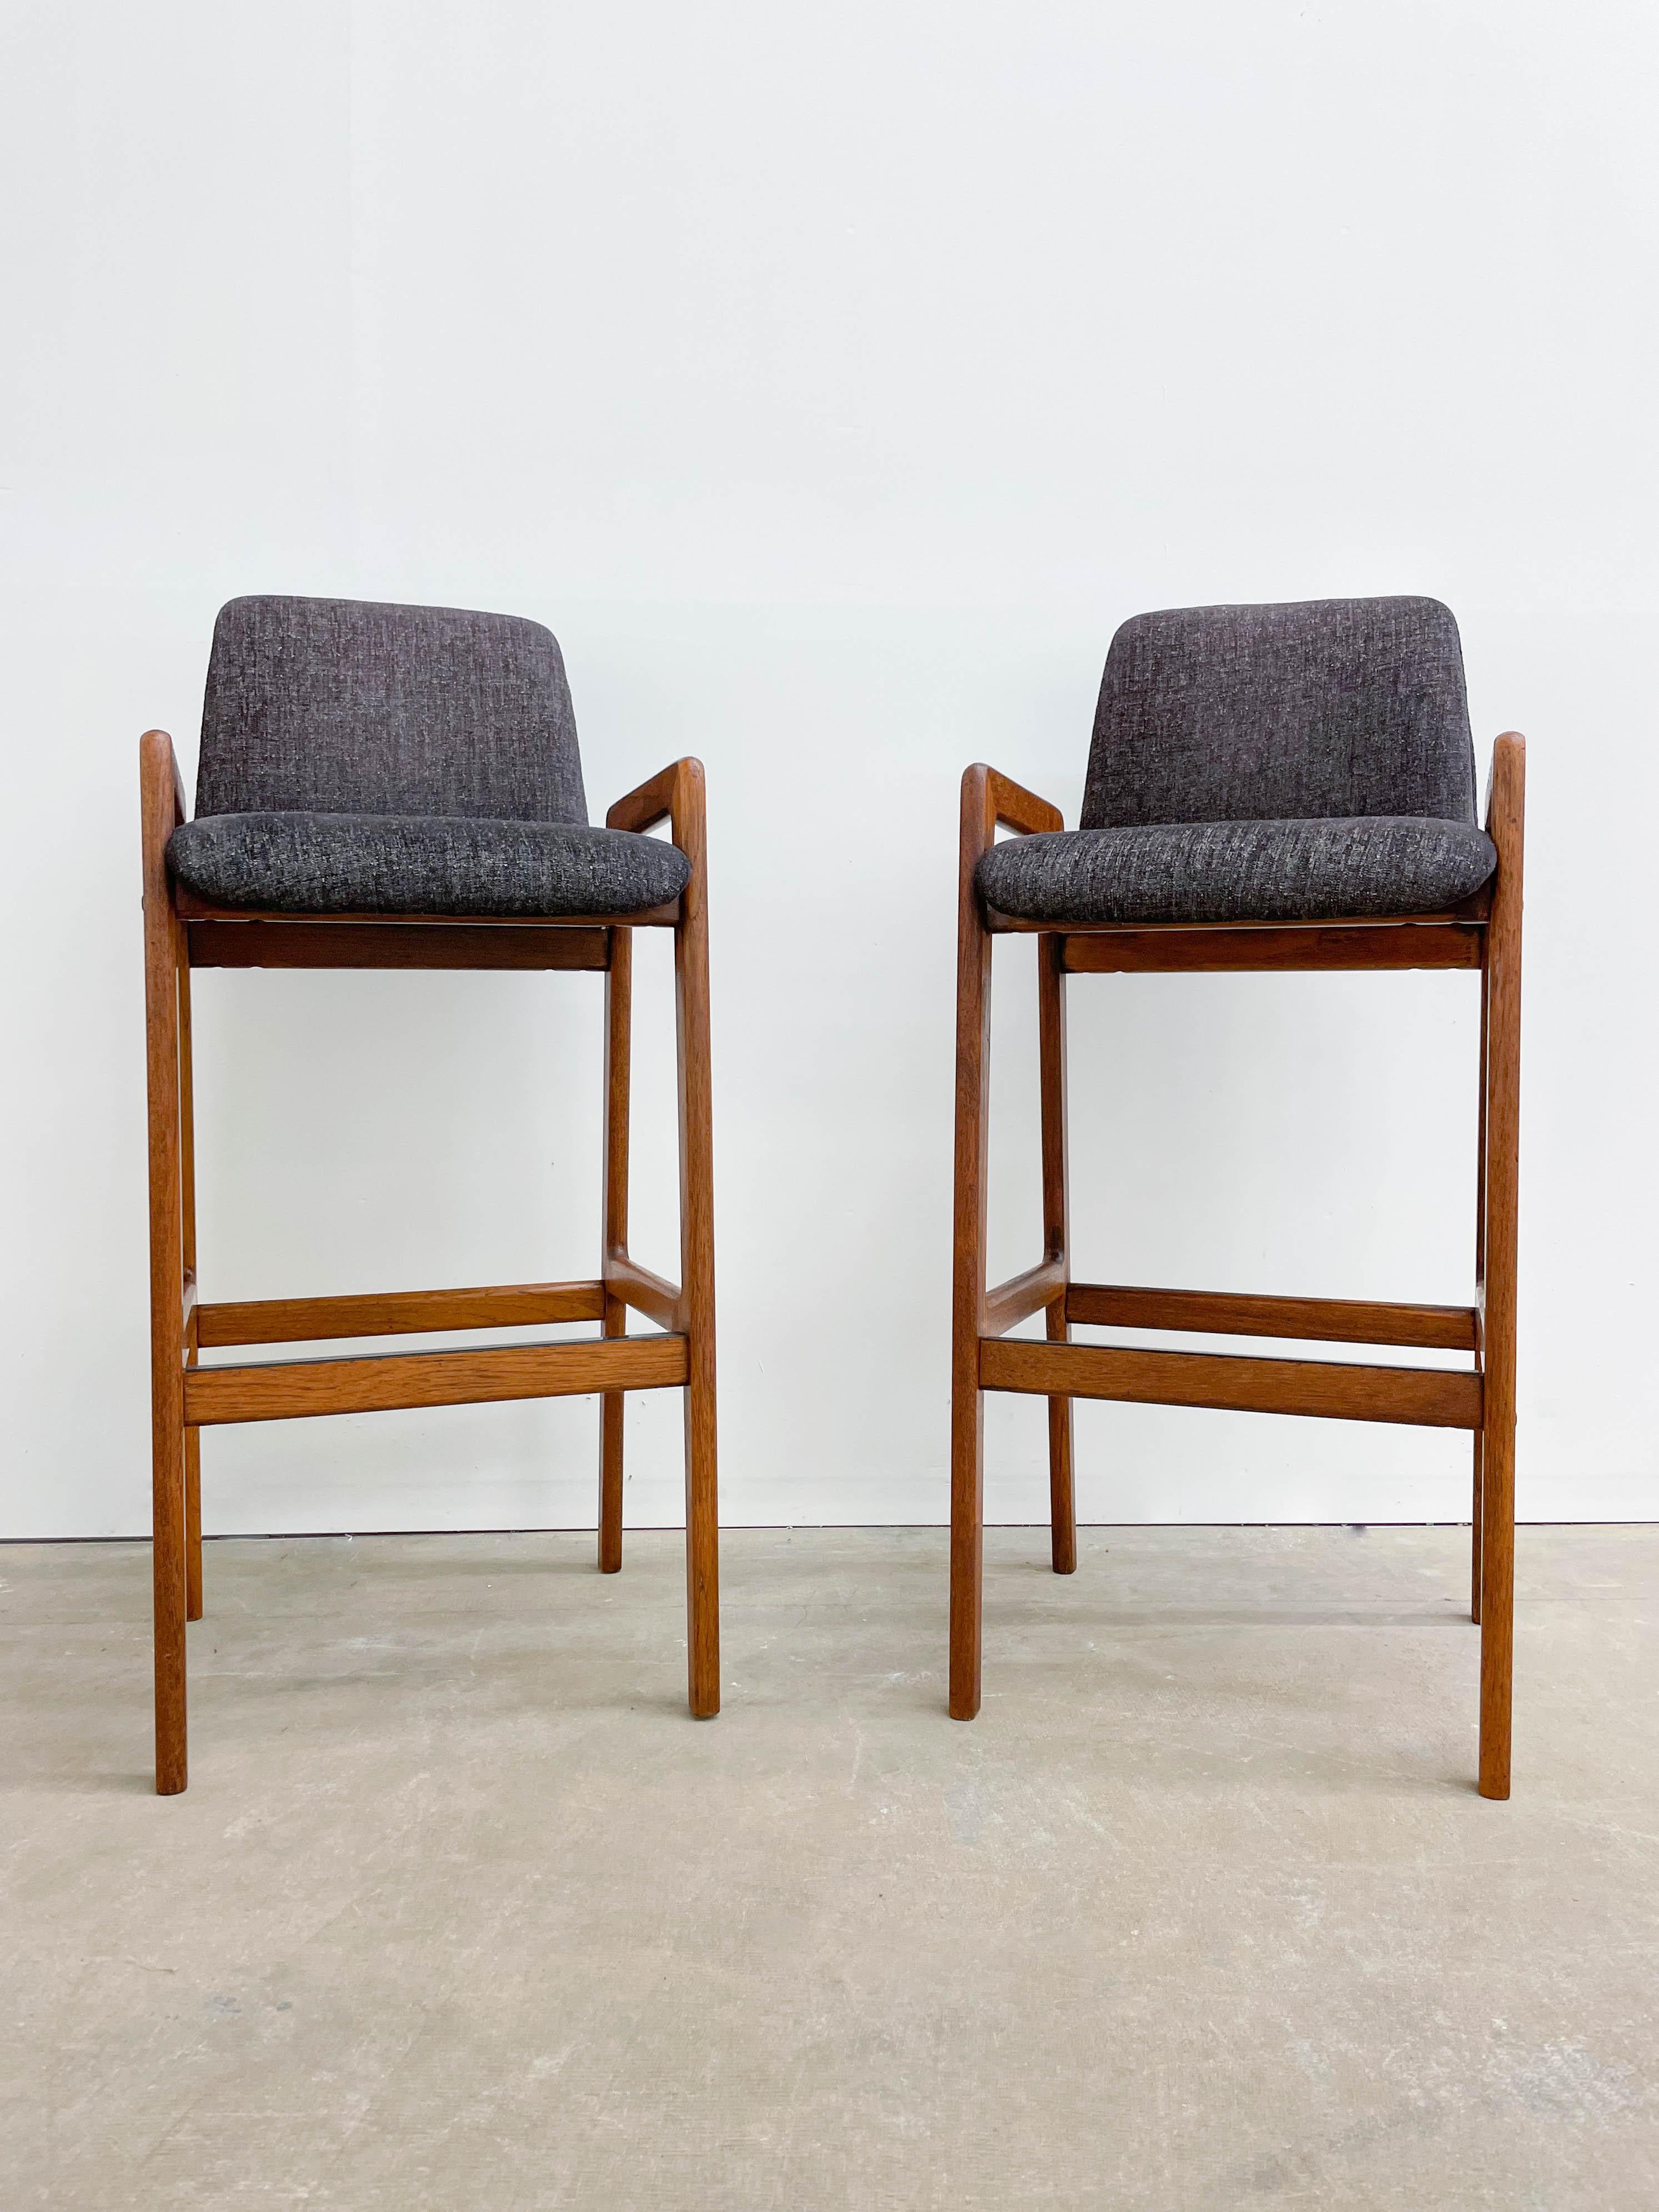 Classic Danish modern design by Tarm Stole OG Mobelfabrik made from solid teak with form fitting seats. Sturdy construction, beautiful teak woodgrain and stylish dark gray upholstery combine to make a pair of very mocfortable and practical